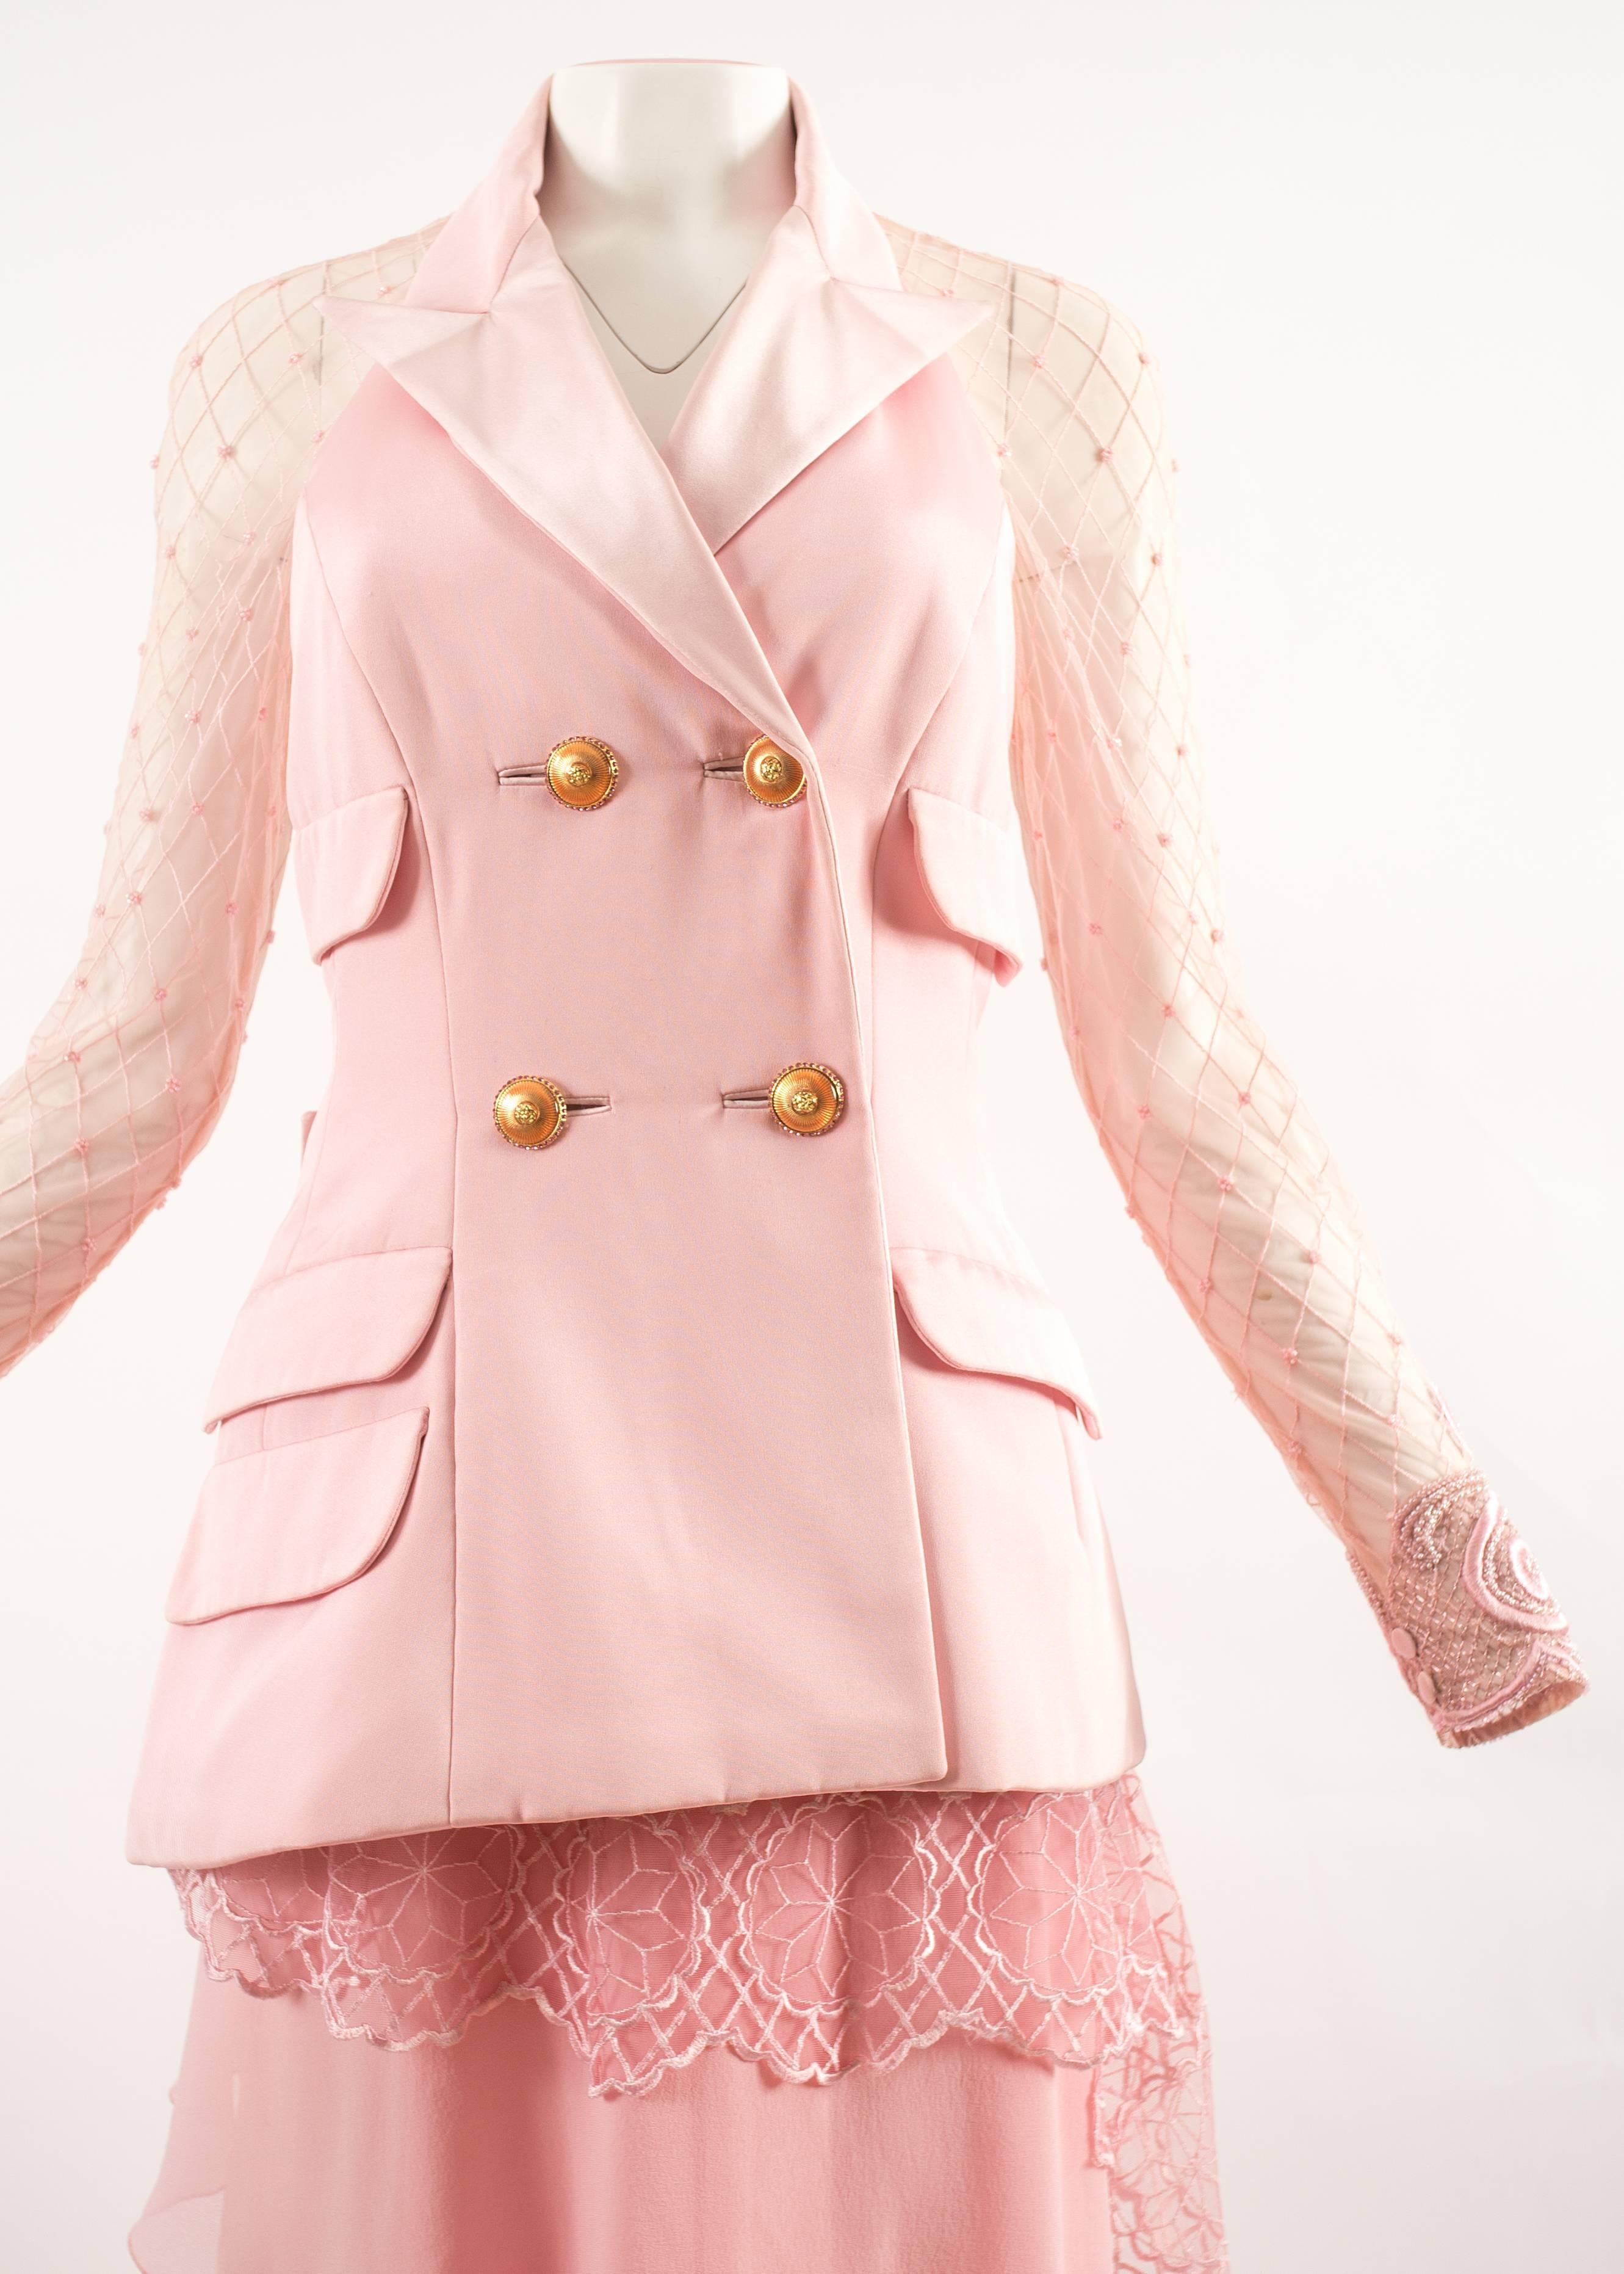 Atelier Versace Autumn-Winter 1993 baby pink embellished 3 piece skirt suit 

This ensemble was specially made for a VIP client and is one of a kind

- Double-breasted evening jacket with silk lapel and collar, large gold buttons with pink stones,